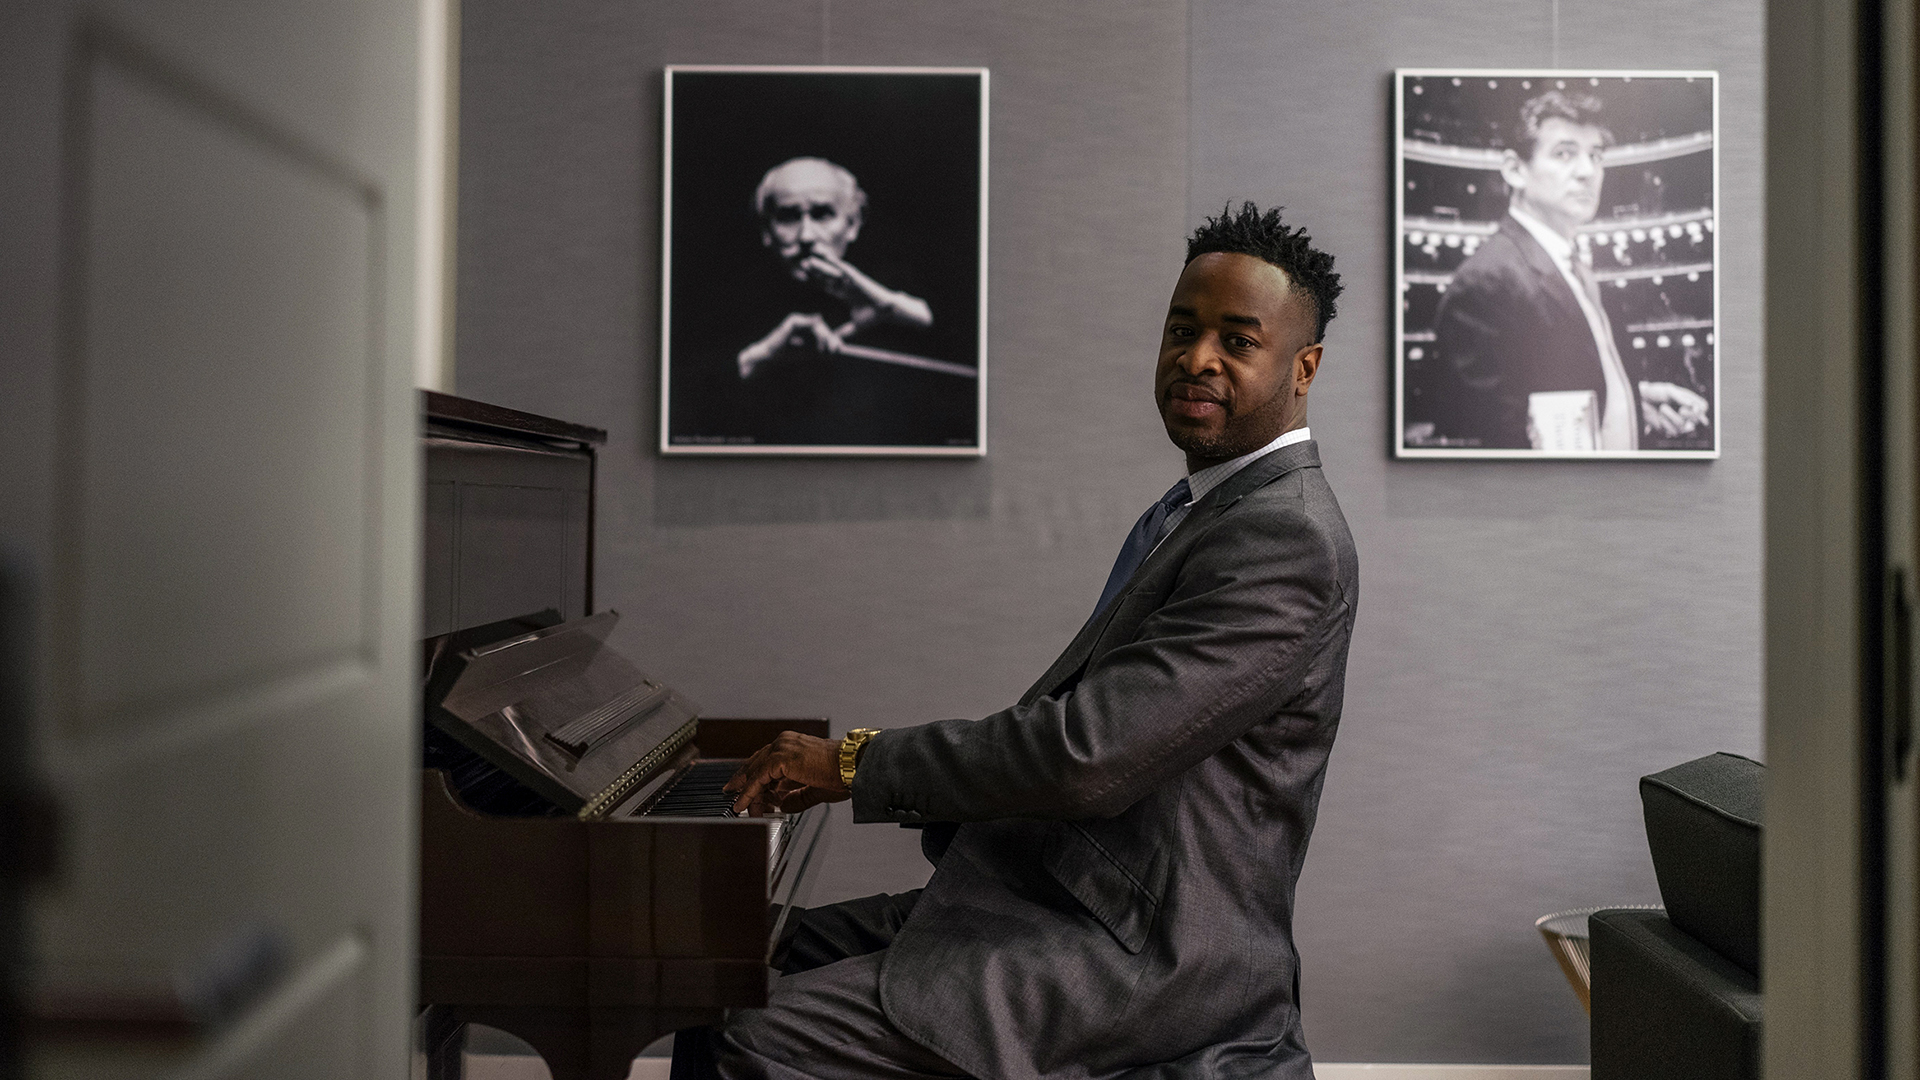 Damien Sneed, composer and pianist, sits on a piano bench with his hands over the keys. His face is turned towards the camera, and he is wearing a dark grey suit. The wall behind him is grey and two photographs hang on the wall.